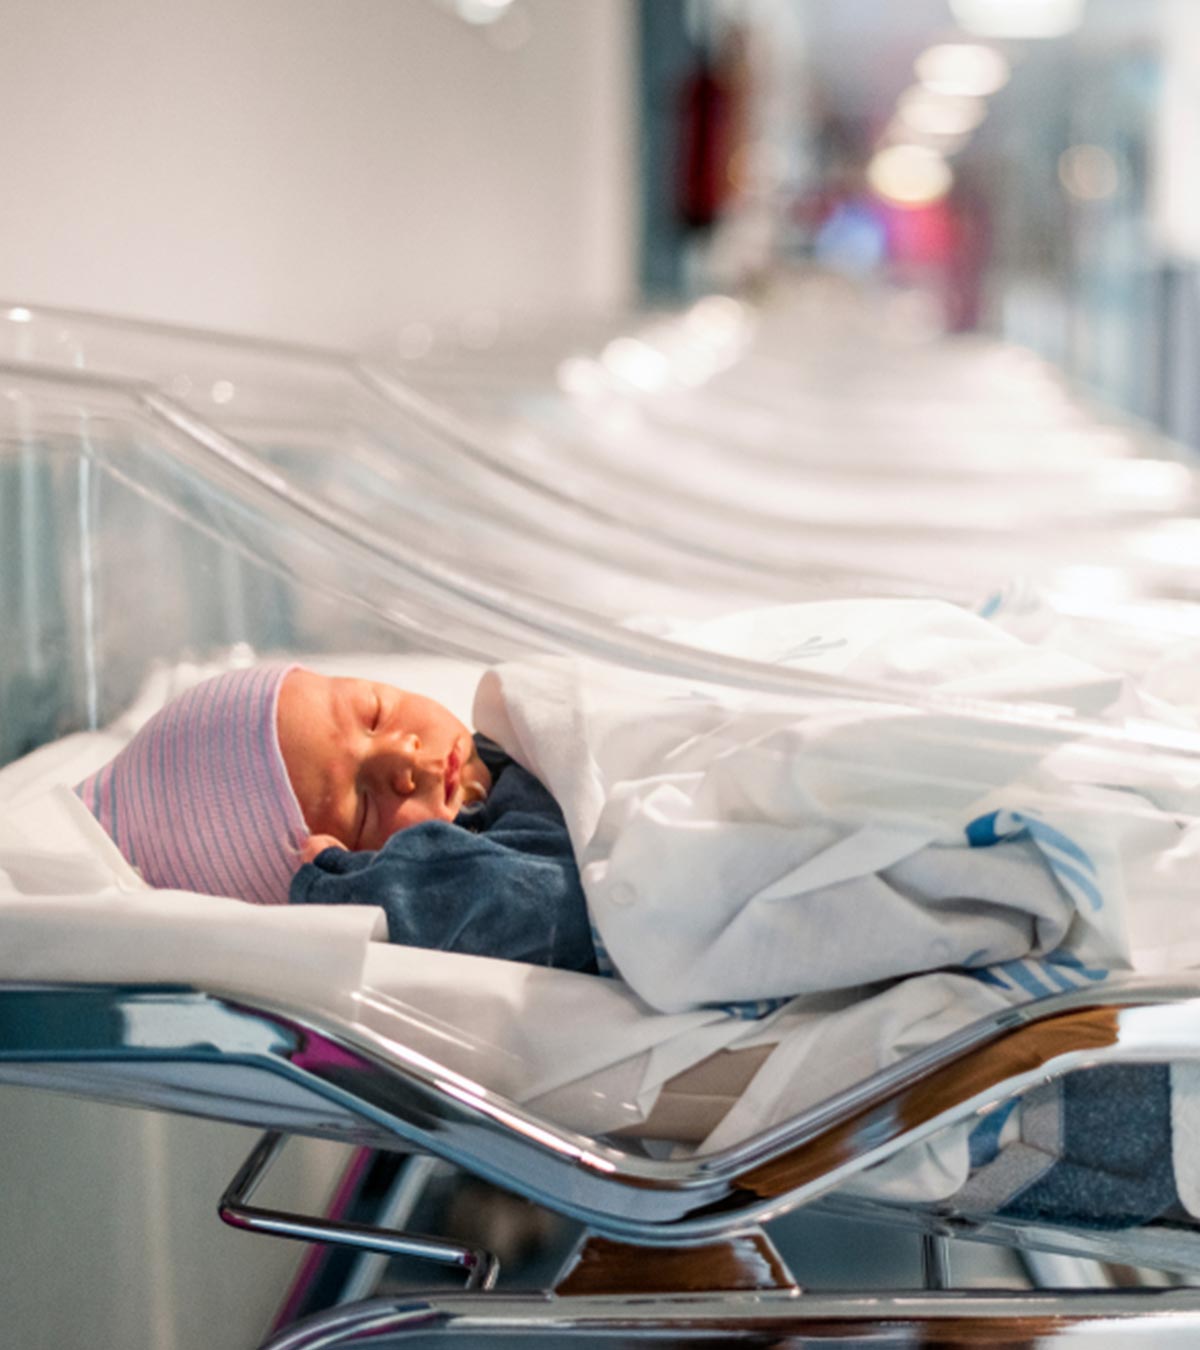 Cesarean-Born Infants At Elevated Danger Of Infection-Related Hospitalization In Childhood